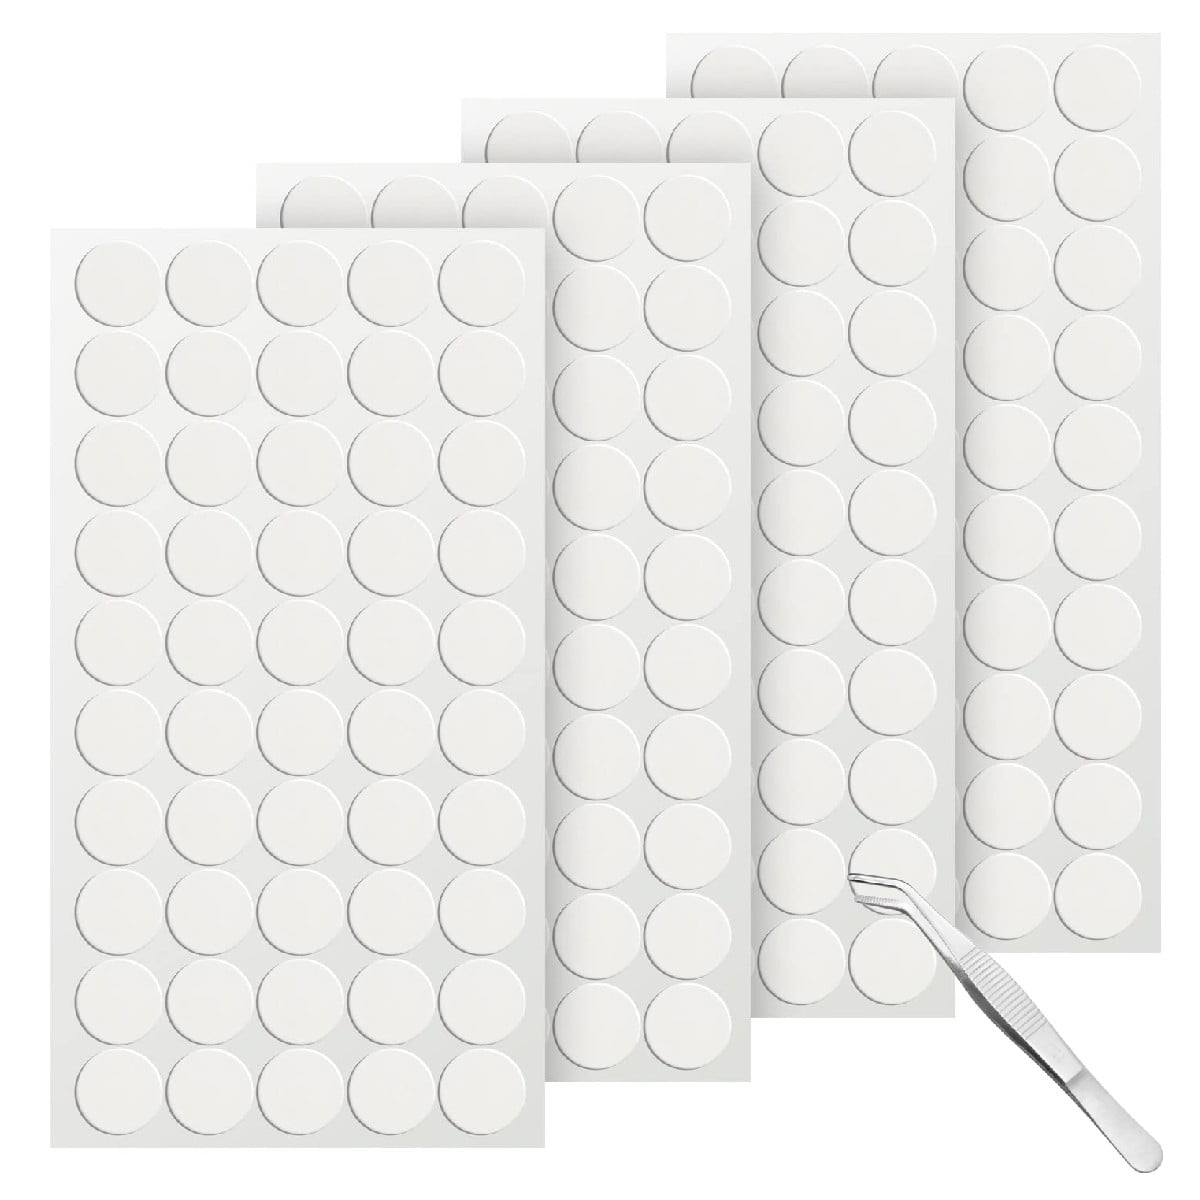 350 Pcs Sticky Dots Clear Double Sided Removable No Damage, Clear Sticky  Tack No Trace, Adhesive Glue Dots for Wall Posters Pictures Hanging Home